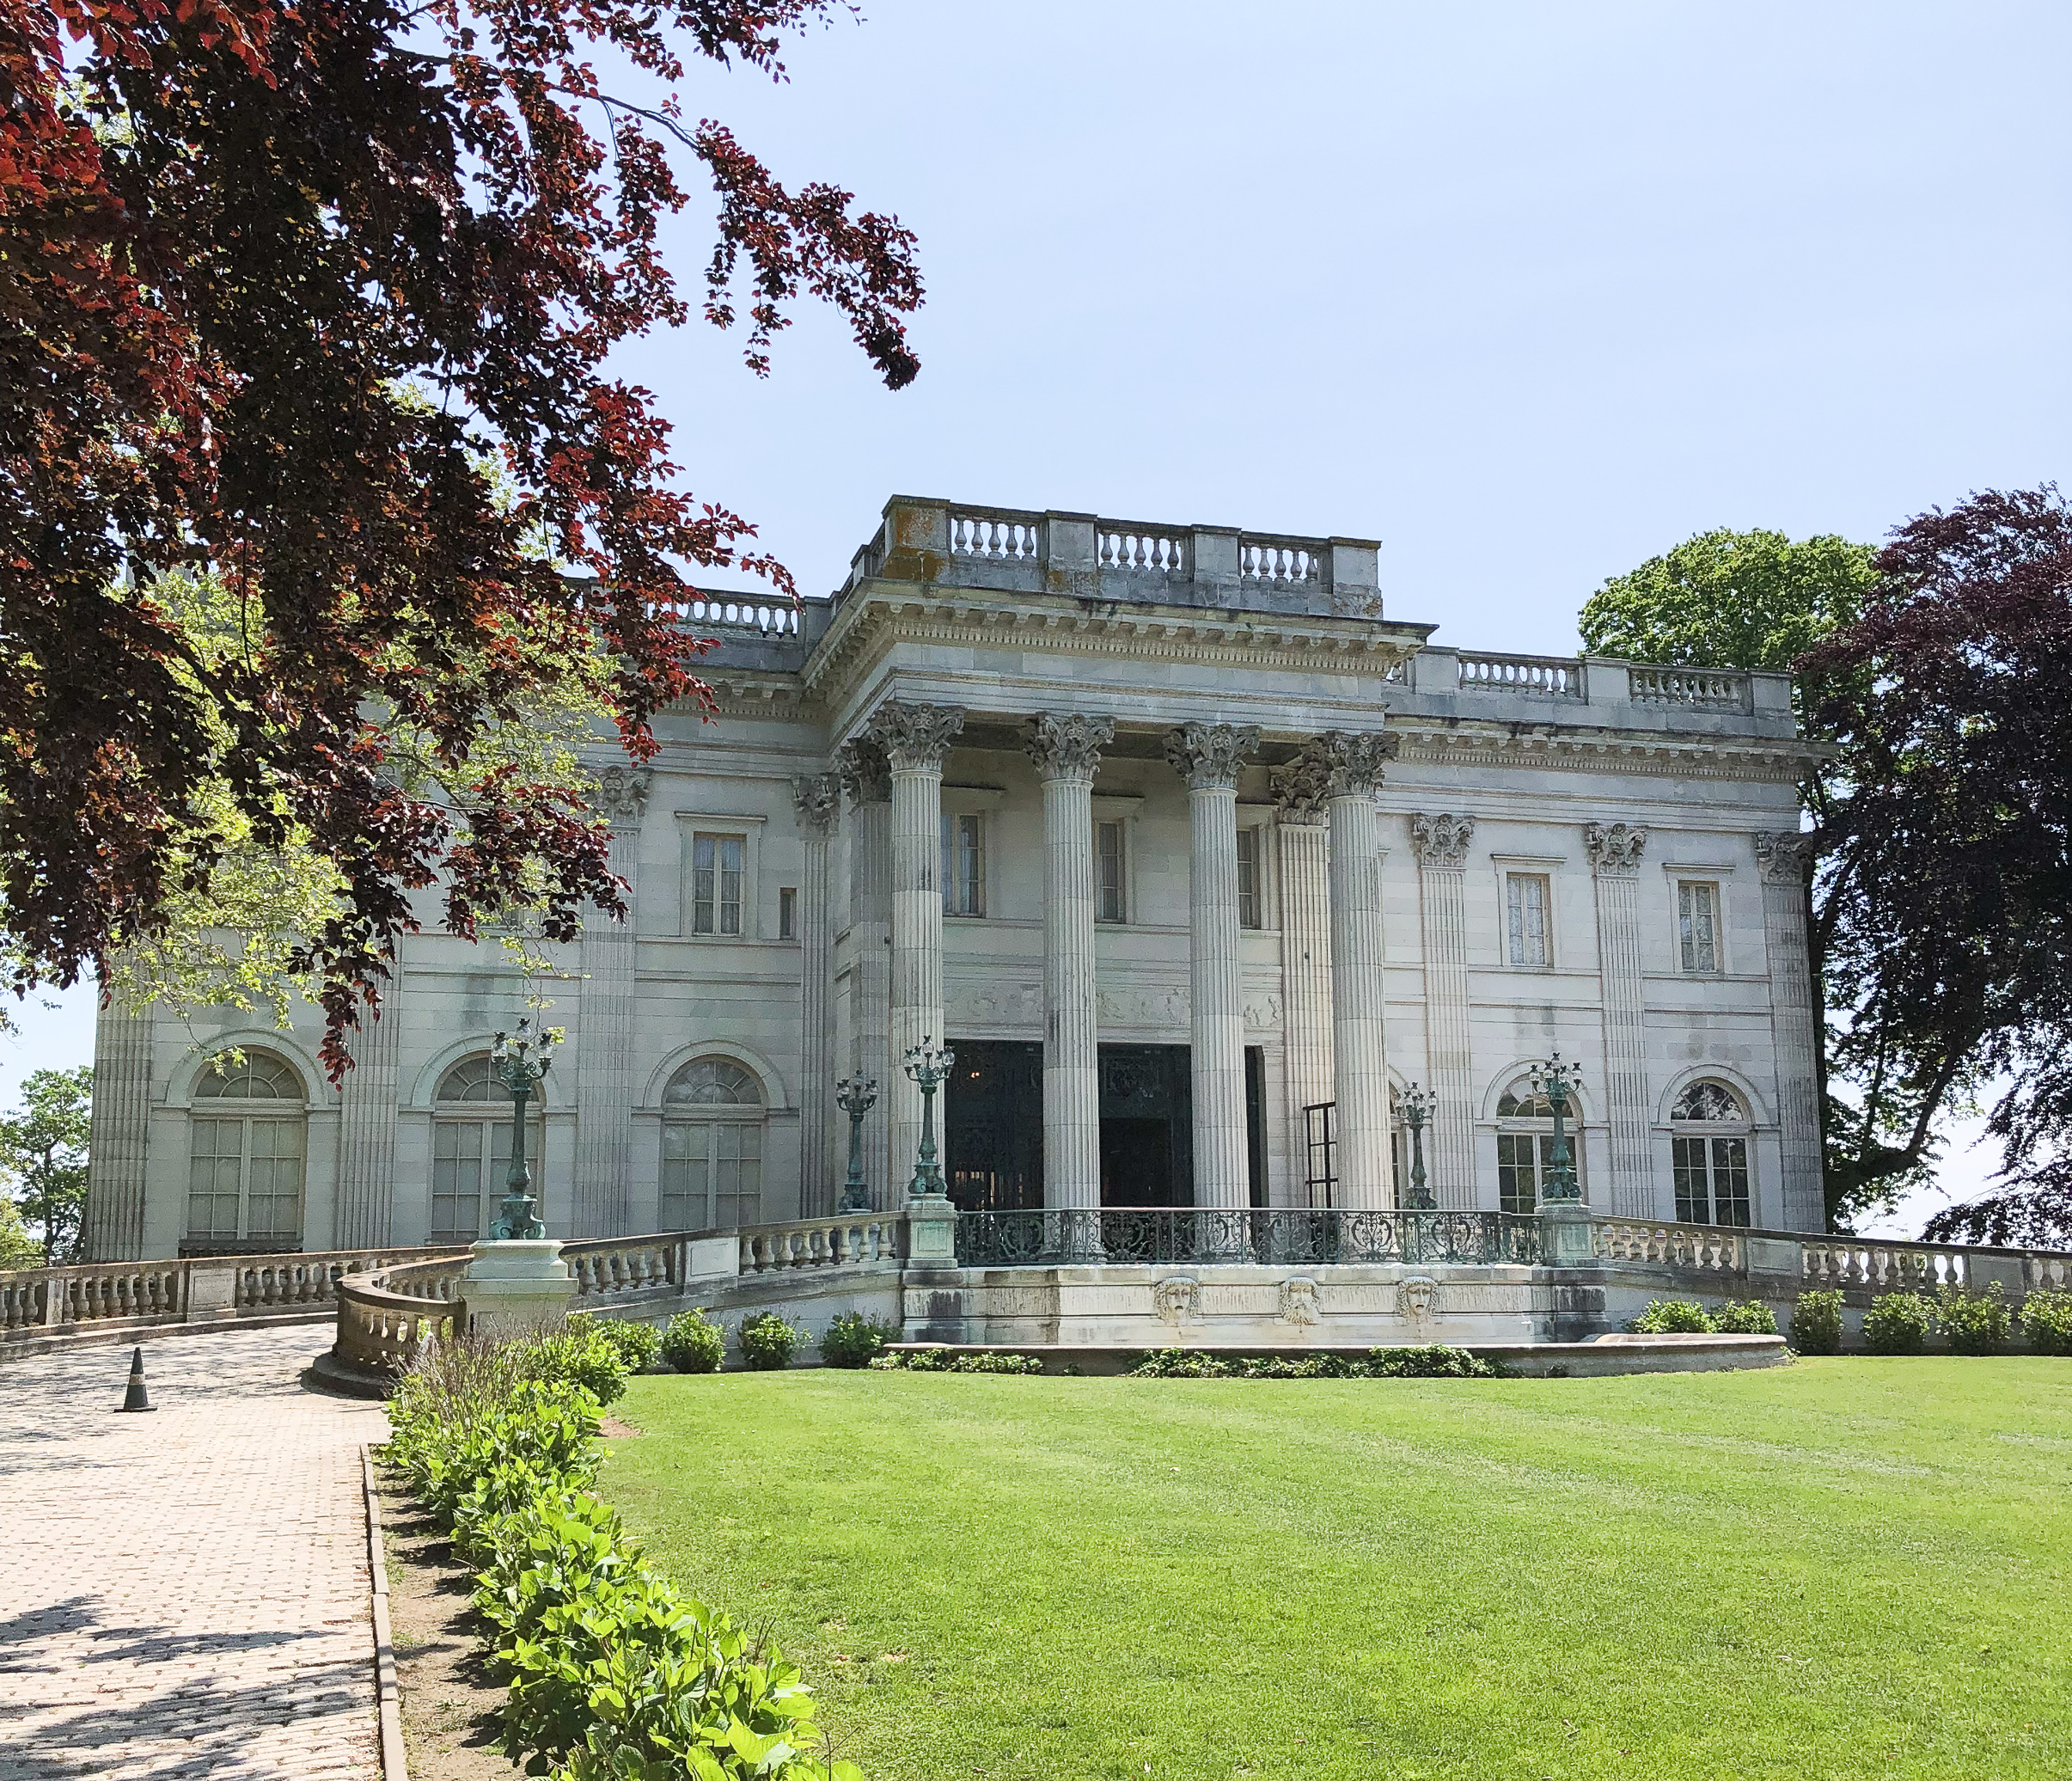 Touring Marble House, Rosecliff, and The Elms in Newport, RI